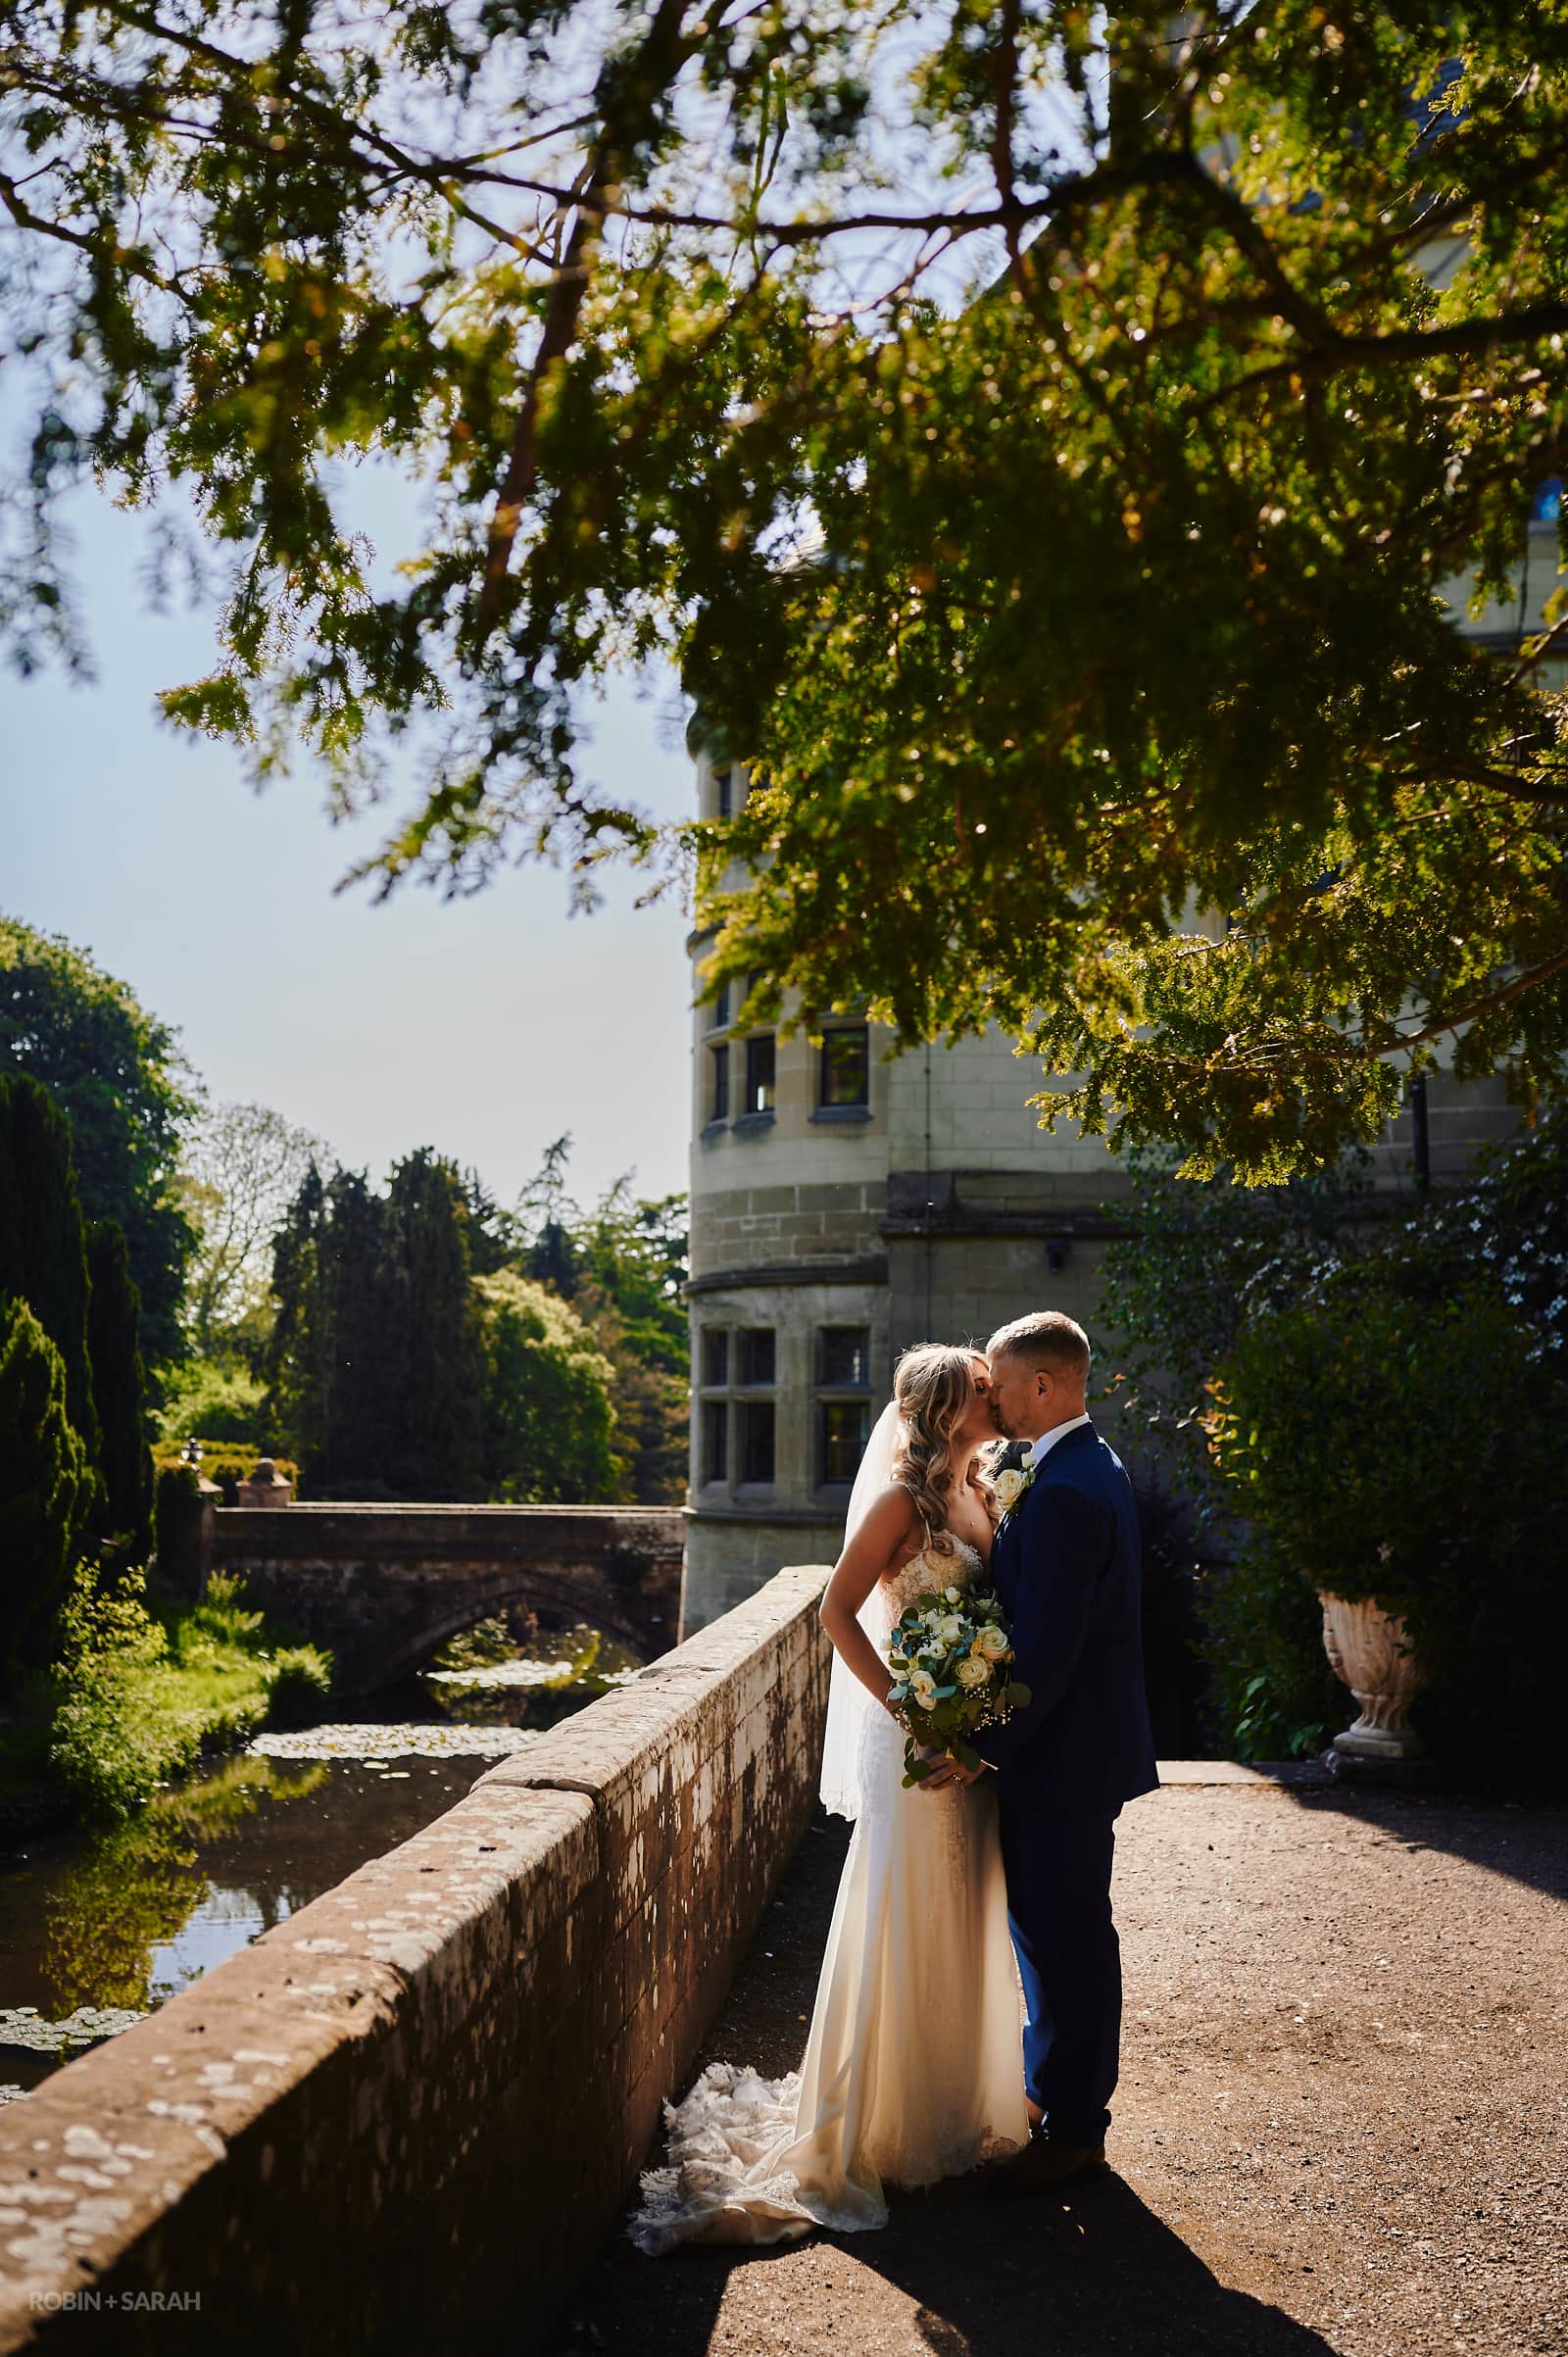 Bride and groom kiss under tree on terrace at Coombe Abbey